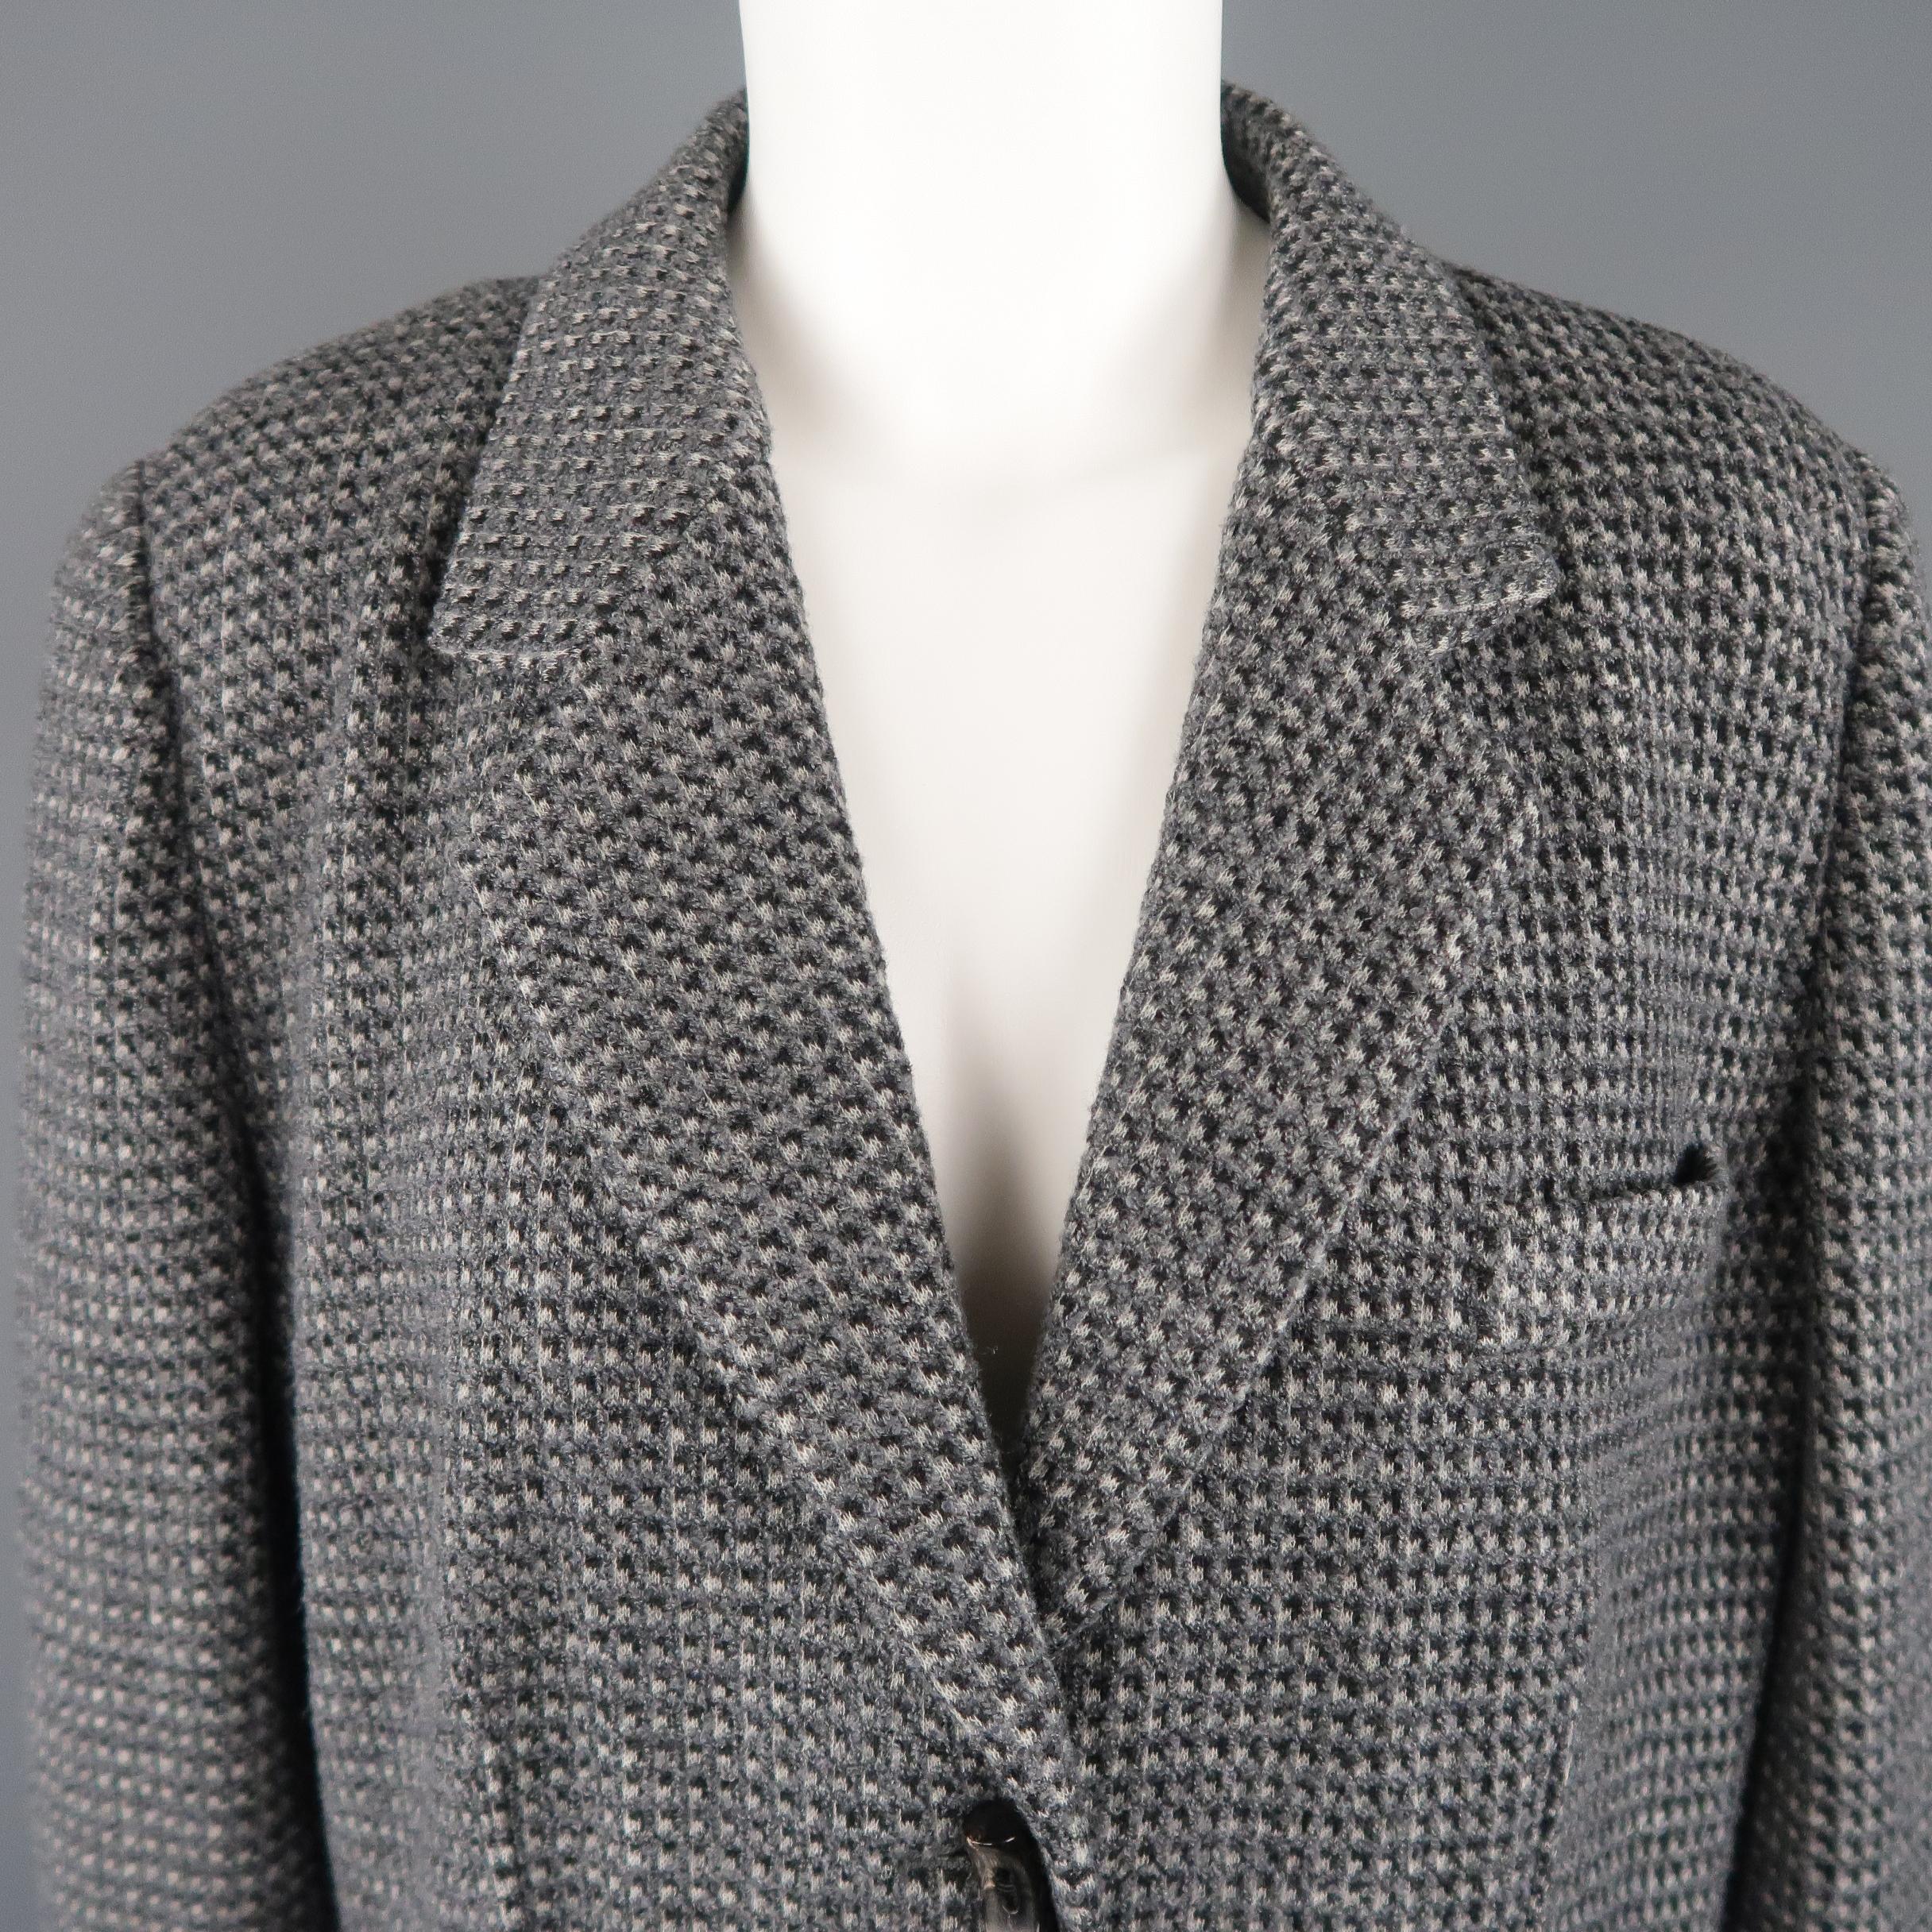 GIORGIO ARMANI sport jacket comes in a gray textured wool blend knit with a notch lapel, single breasted three button front, button cuffs, and ventless back. Made in Italy.
 
Excellent Pre-Owned Condition. Retails: $2,500.00.
Marked: IT 52
